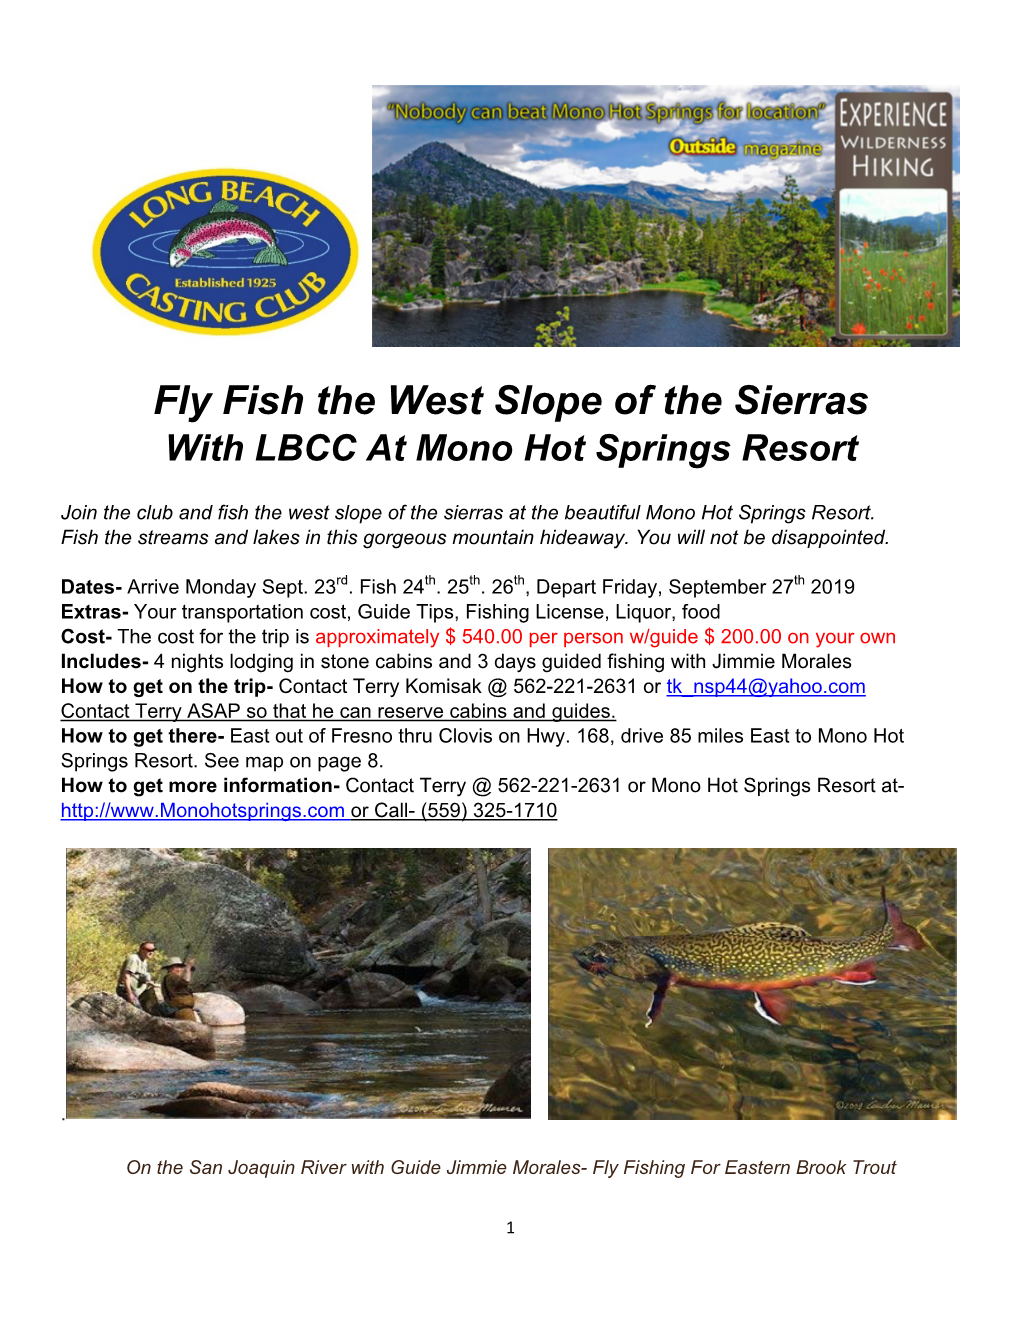 Fly Fish the West Slope of the Sierras with LBCC at Mono Hot Springs Resort